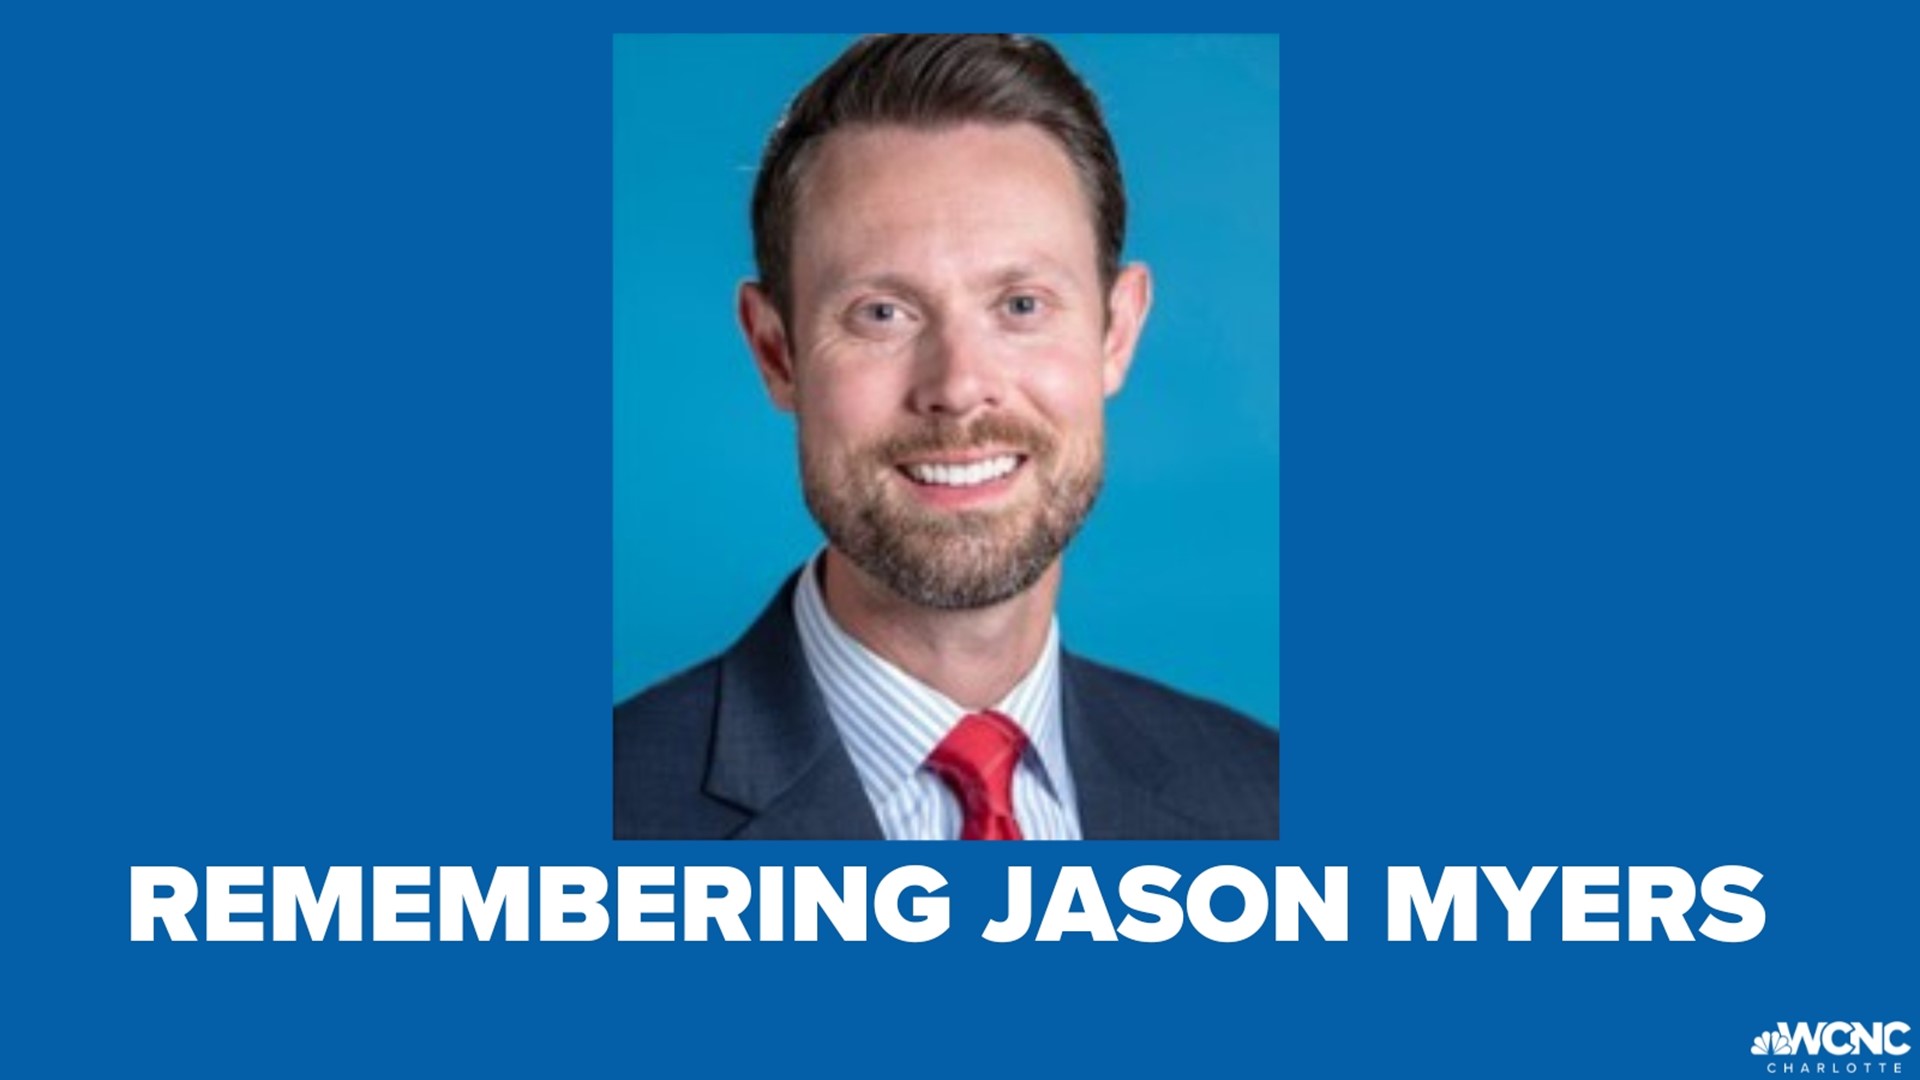 A funeral service was underway for WBTV meteorologist Jason Myers who tragically passed away in a helicopter crash earlier this week.